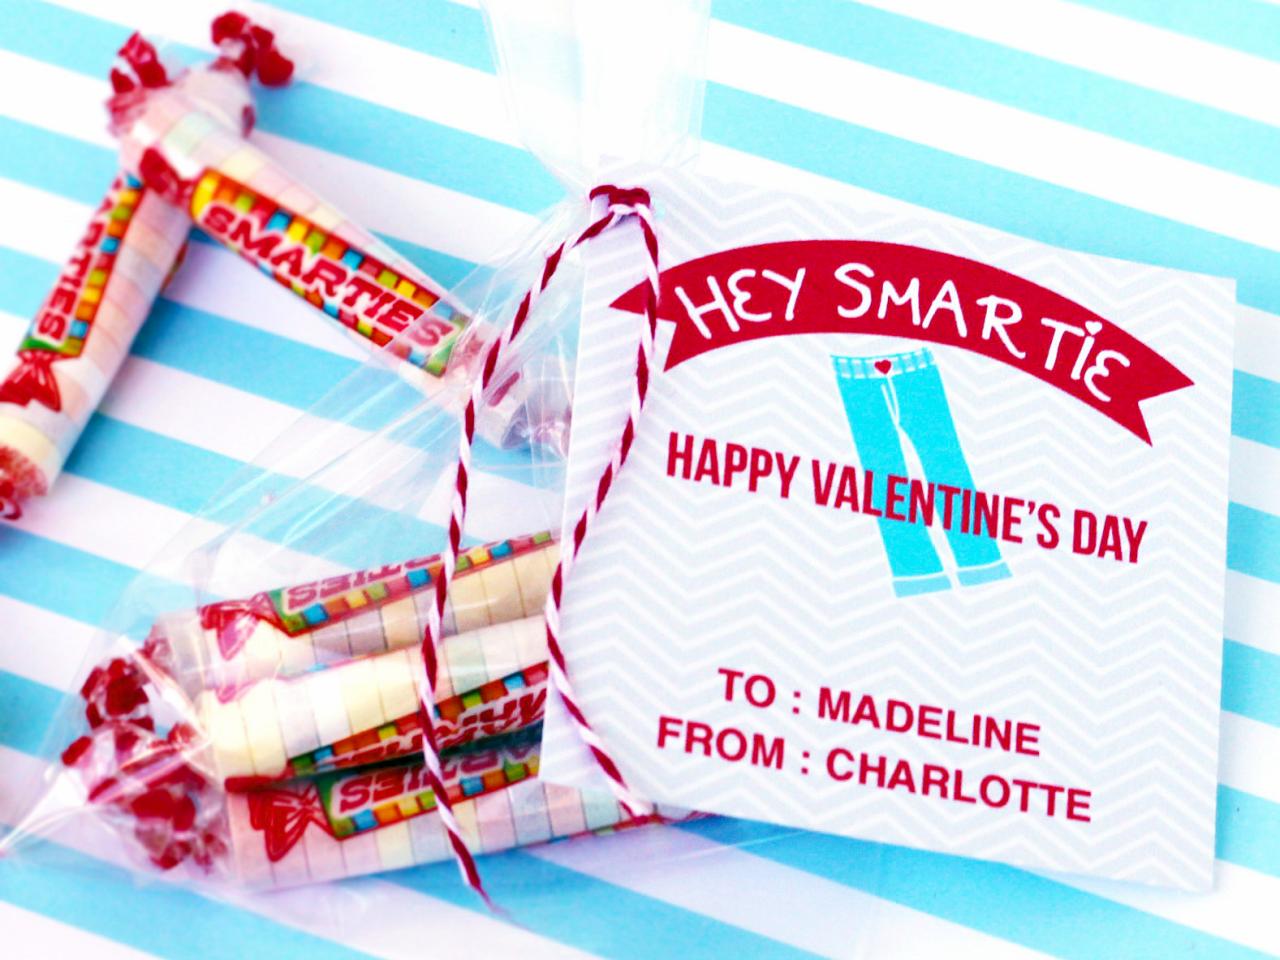 Easy Homemade Valentine's Day Cards | DIY Network Blog: Made + Remade | DIY1280 x 960